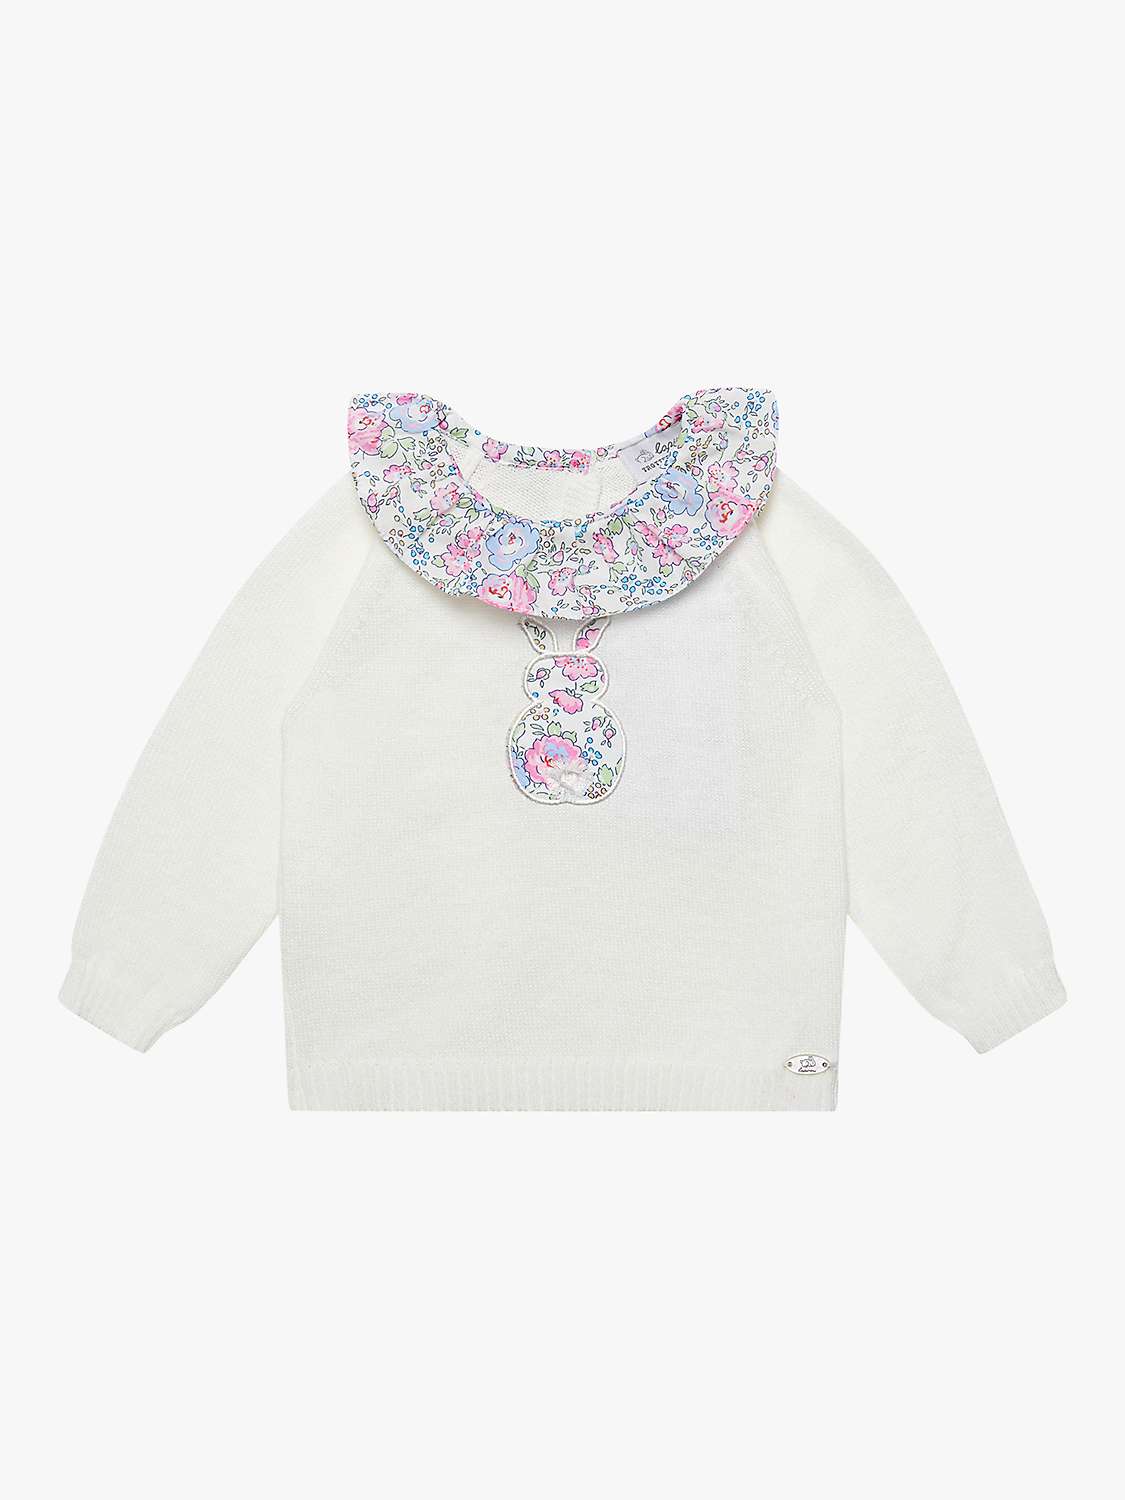 Buy Trotters Baby Felicite Bunny Wool Blend Knitted Set, White/Pink Online at johnlewis.com